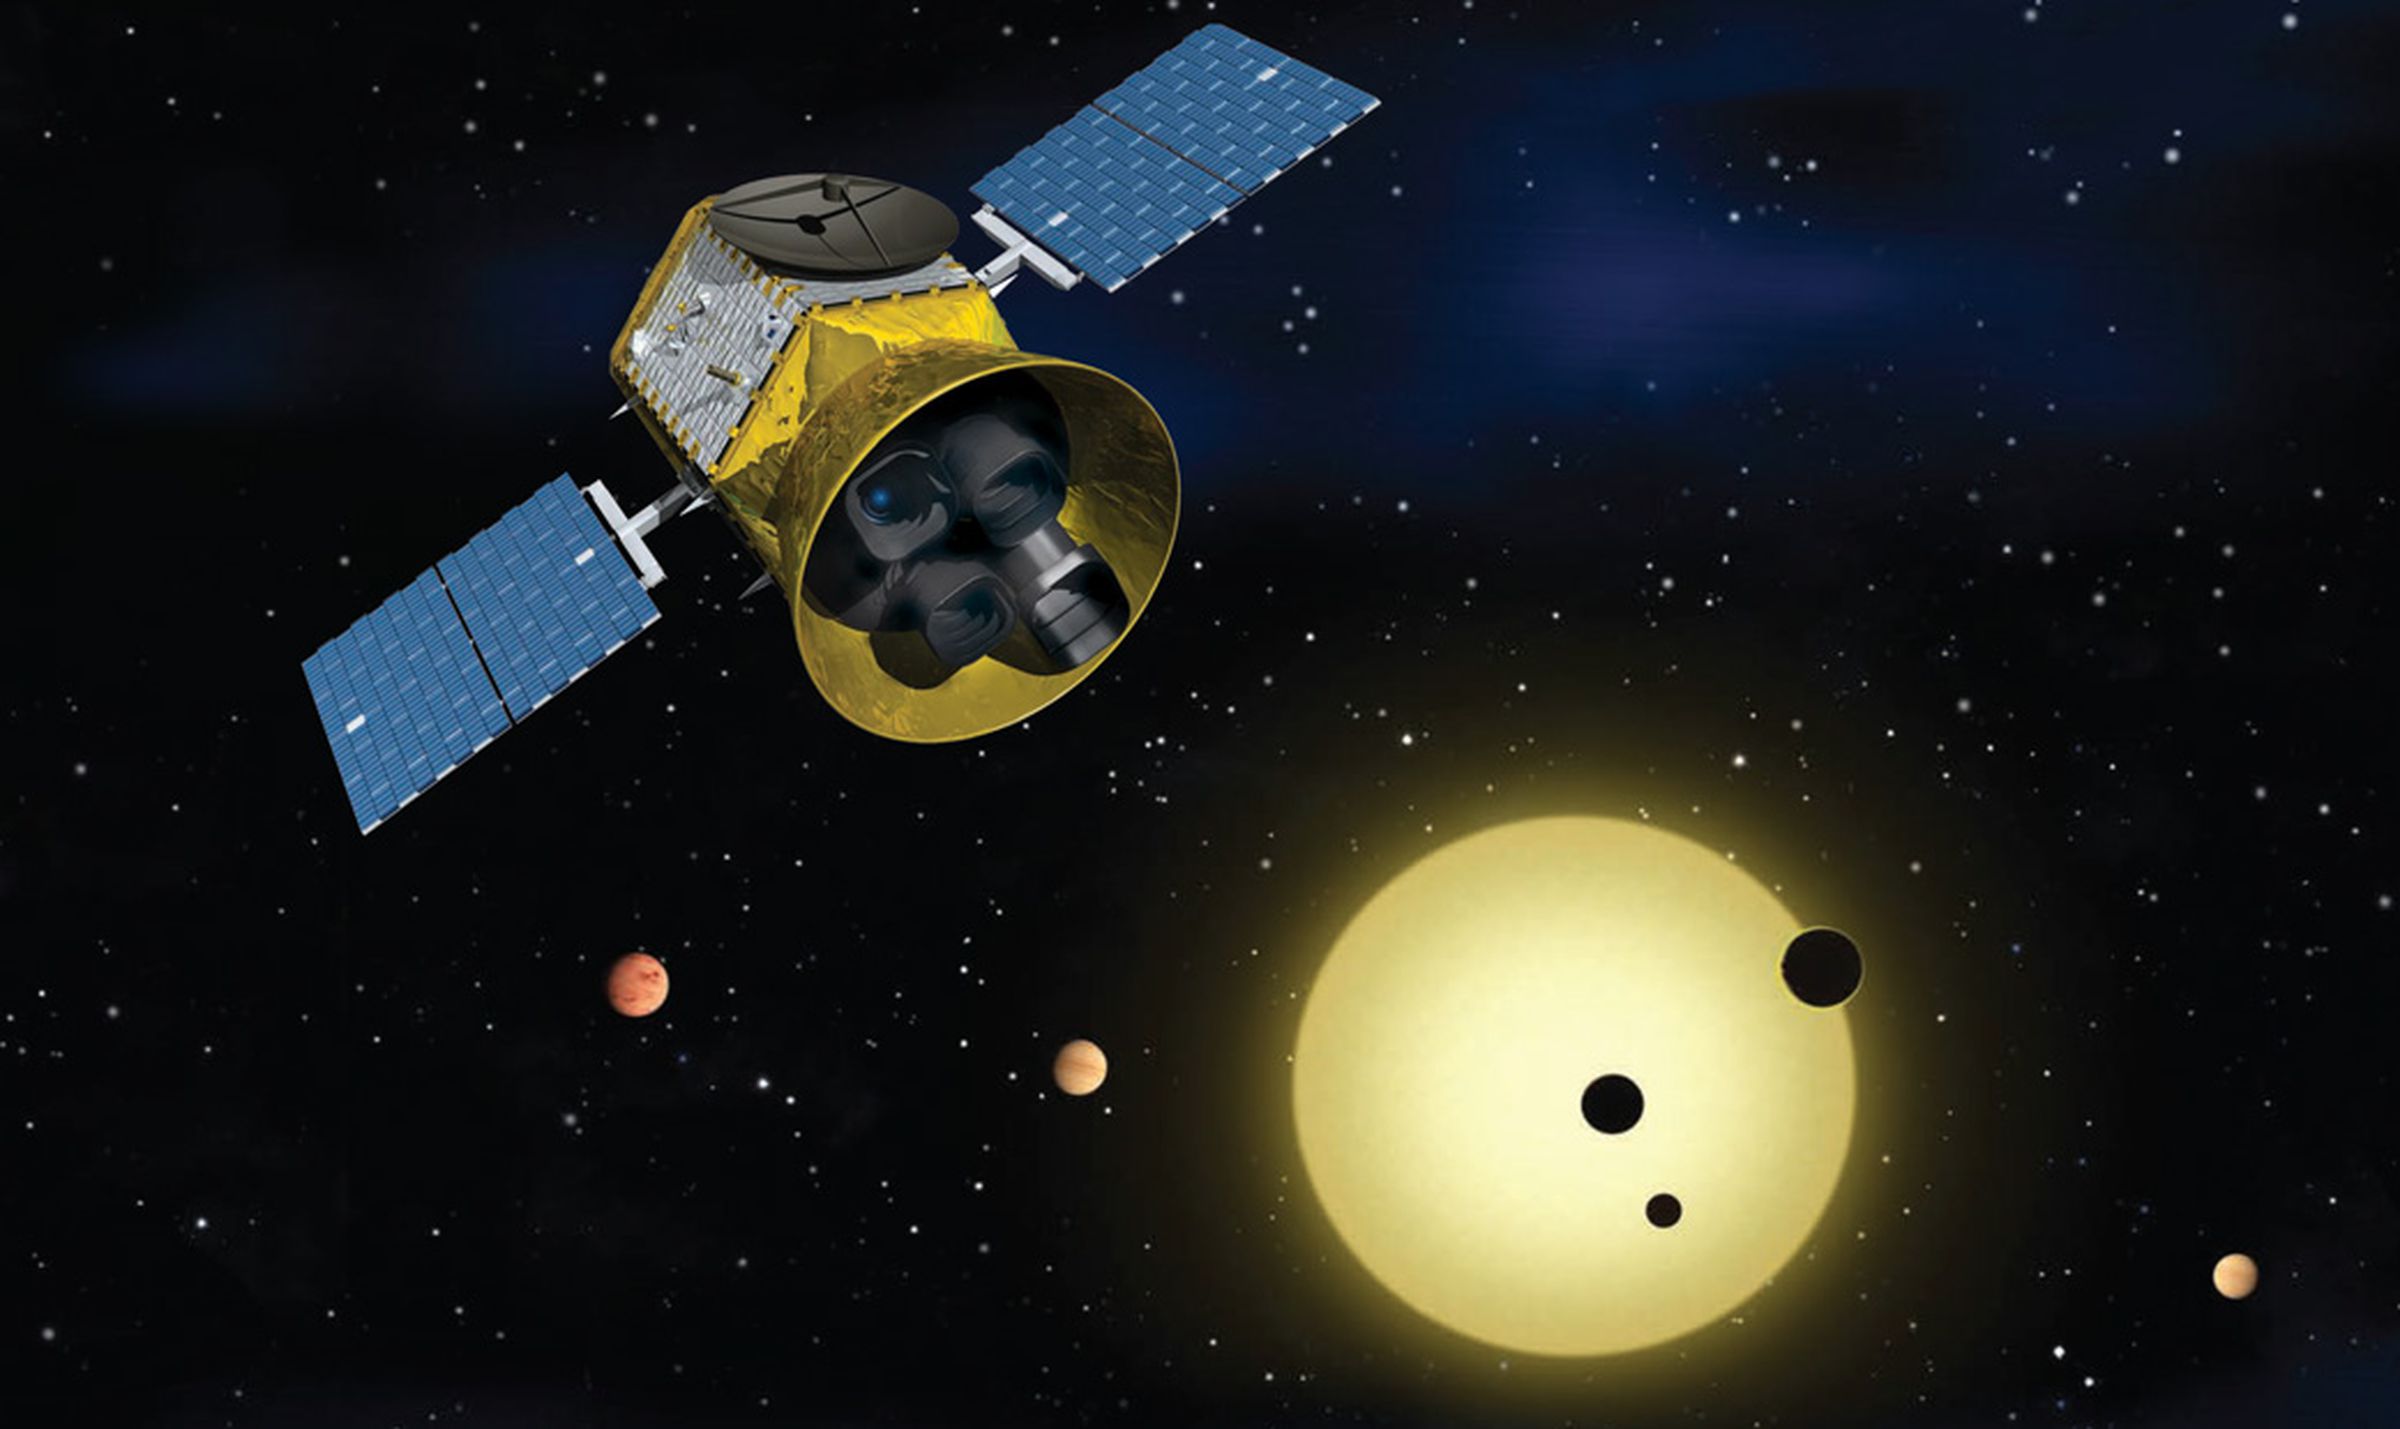 An artistic rendering of the TESS spacecraft.